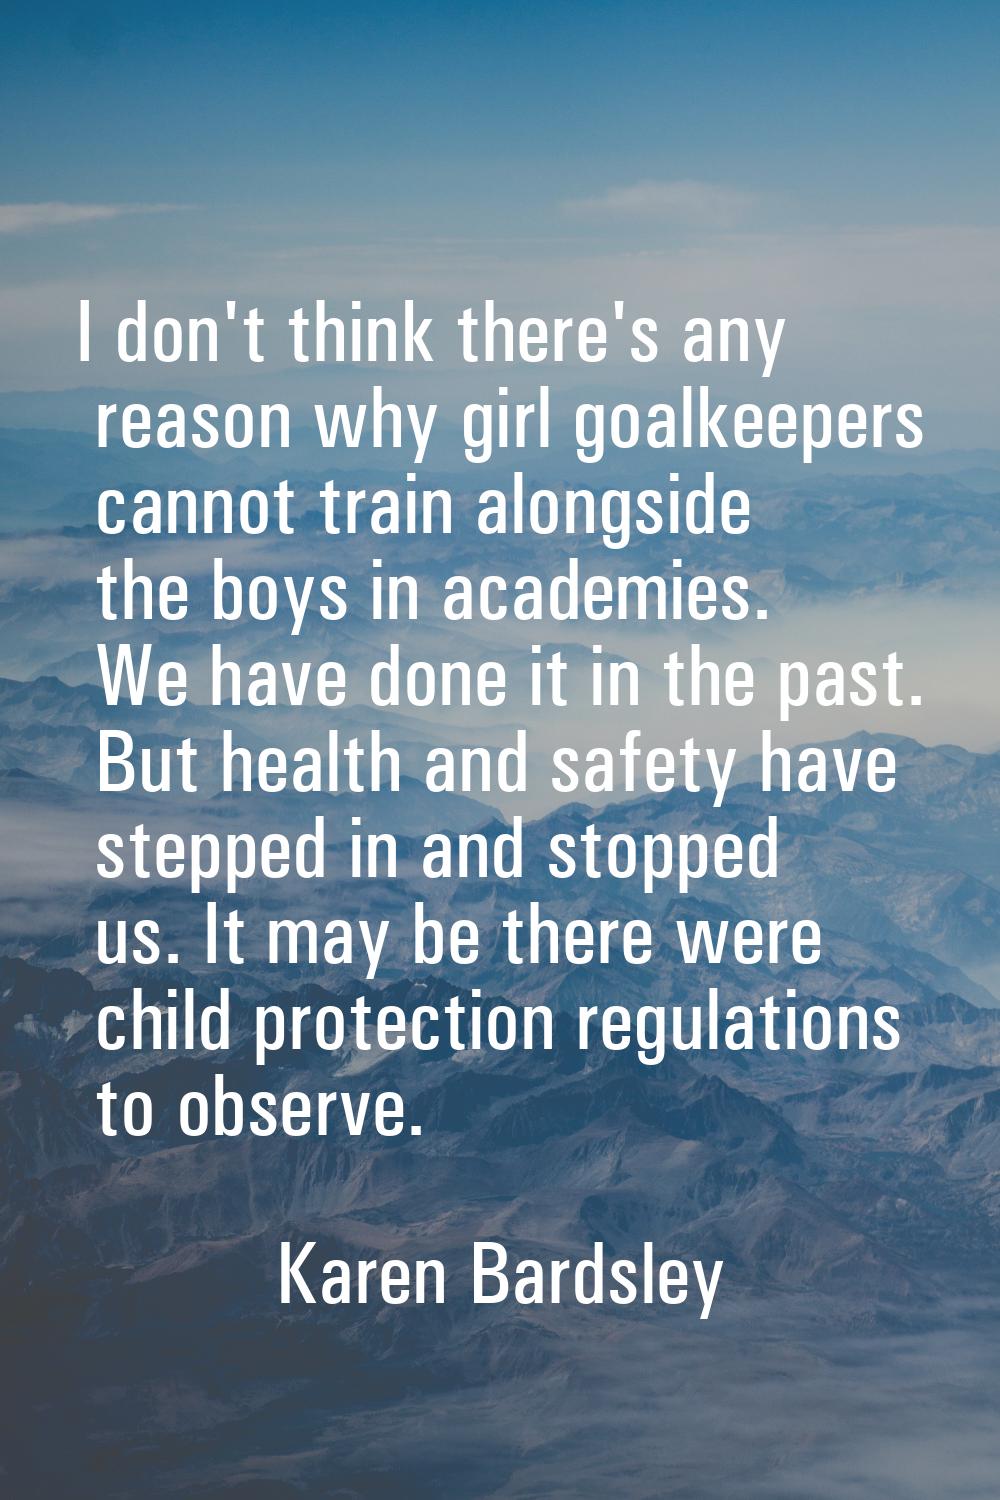 I don't think there's any reason why girl goalkeepers cannot train alongside the boys in academies.